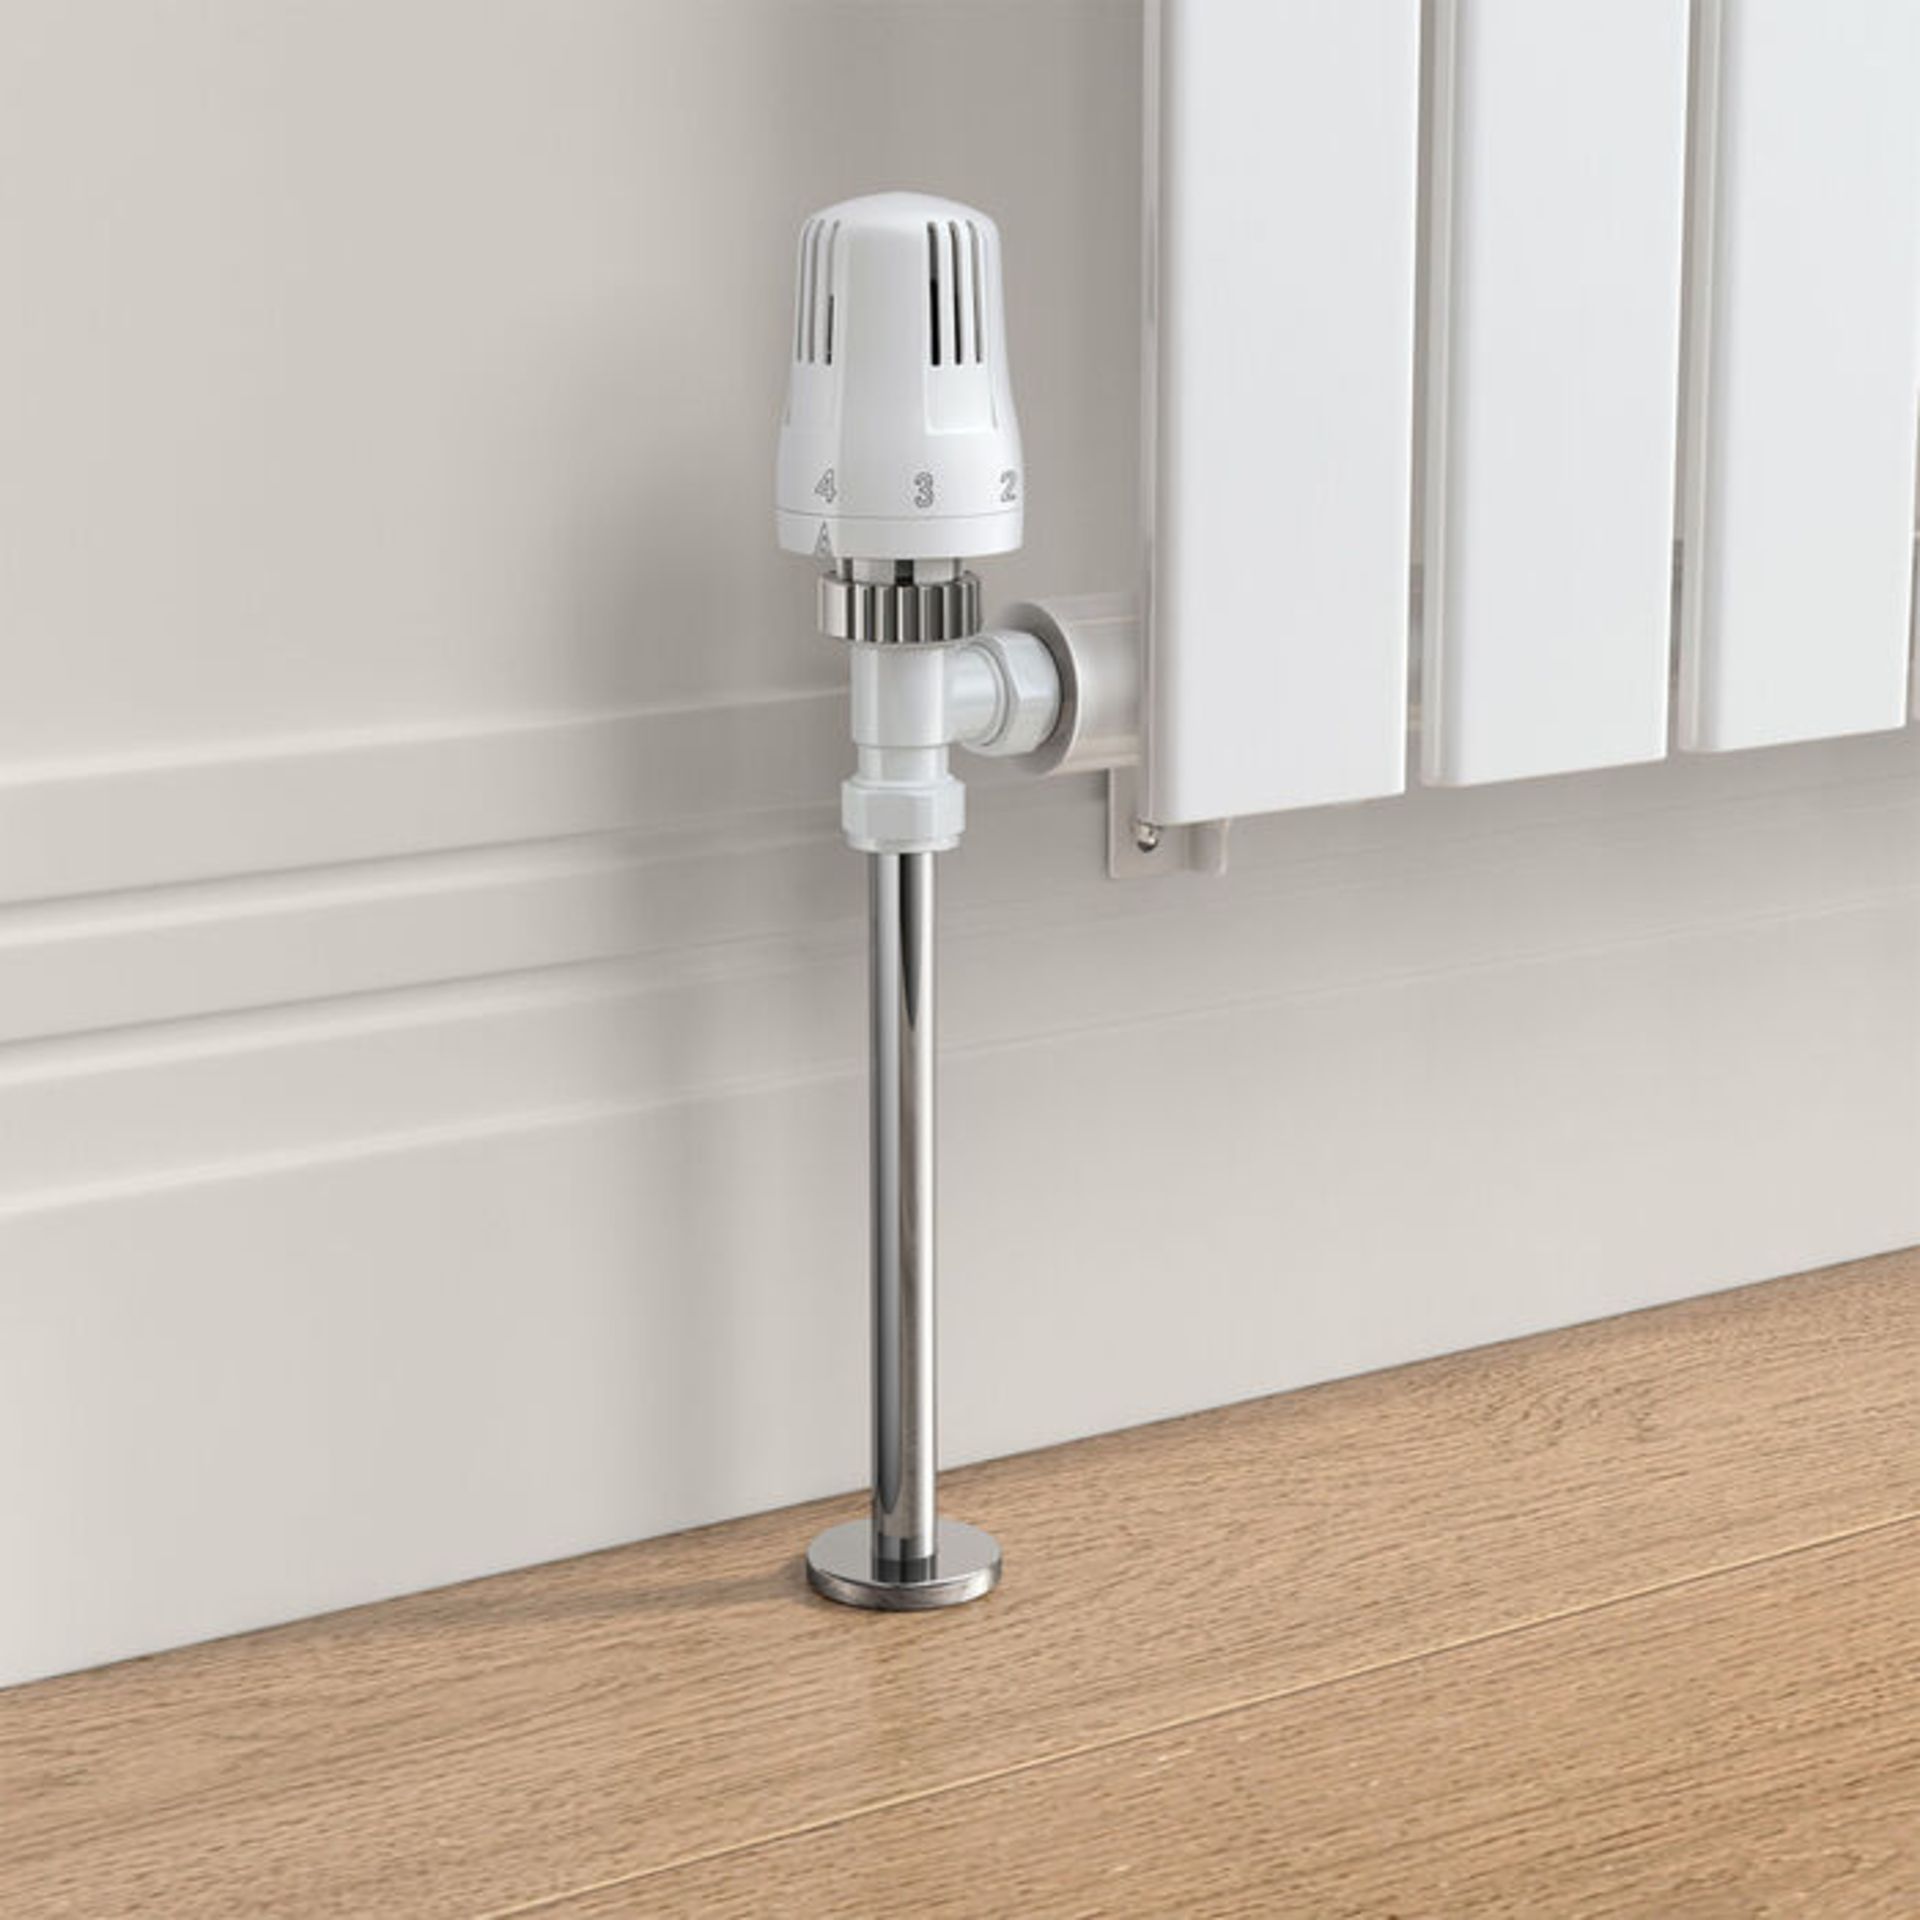 (E1037) 15mm Standard Connection Thermostatic Angled Gloss White Radiator Valves Solid brass c...